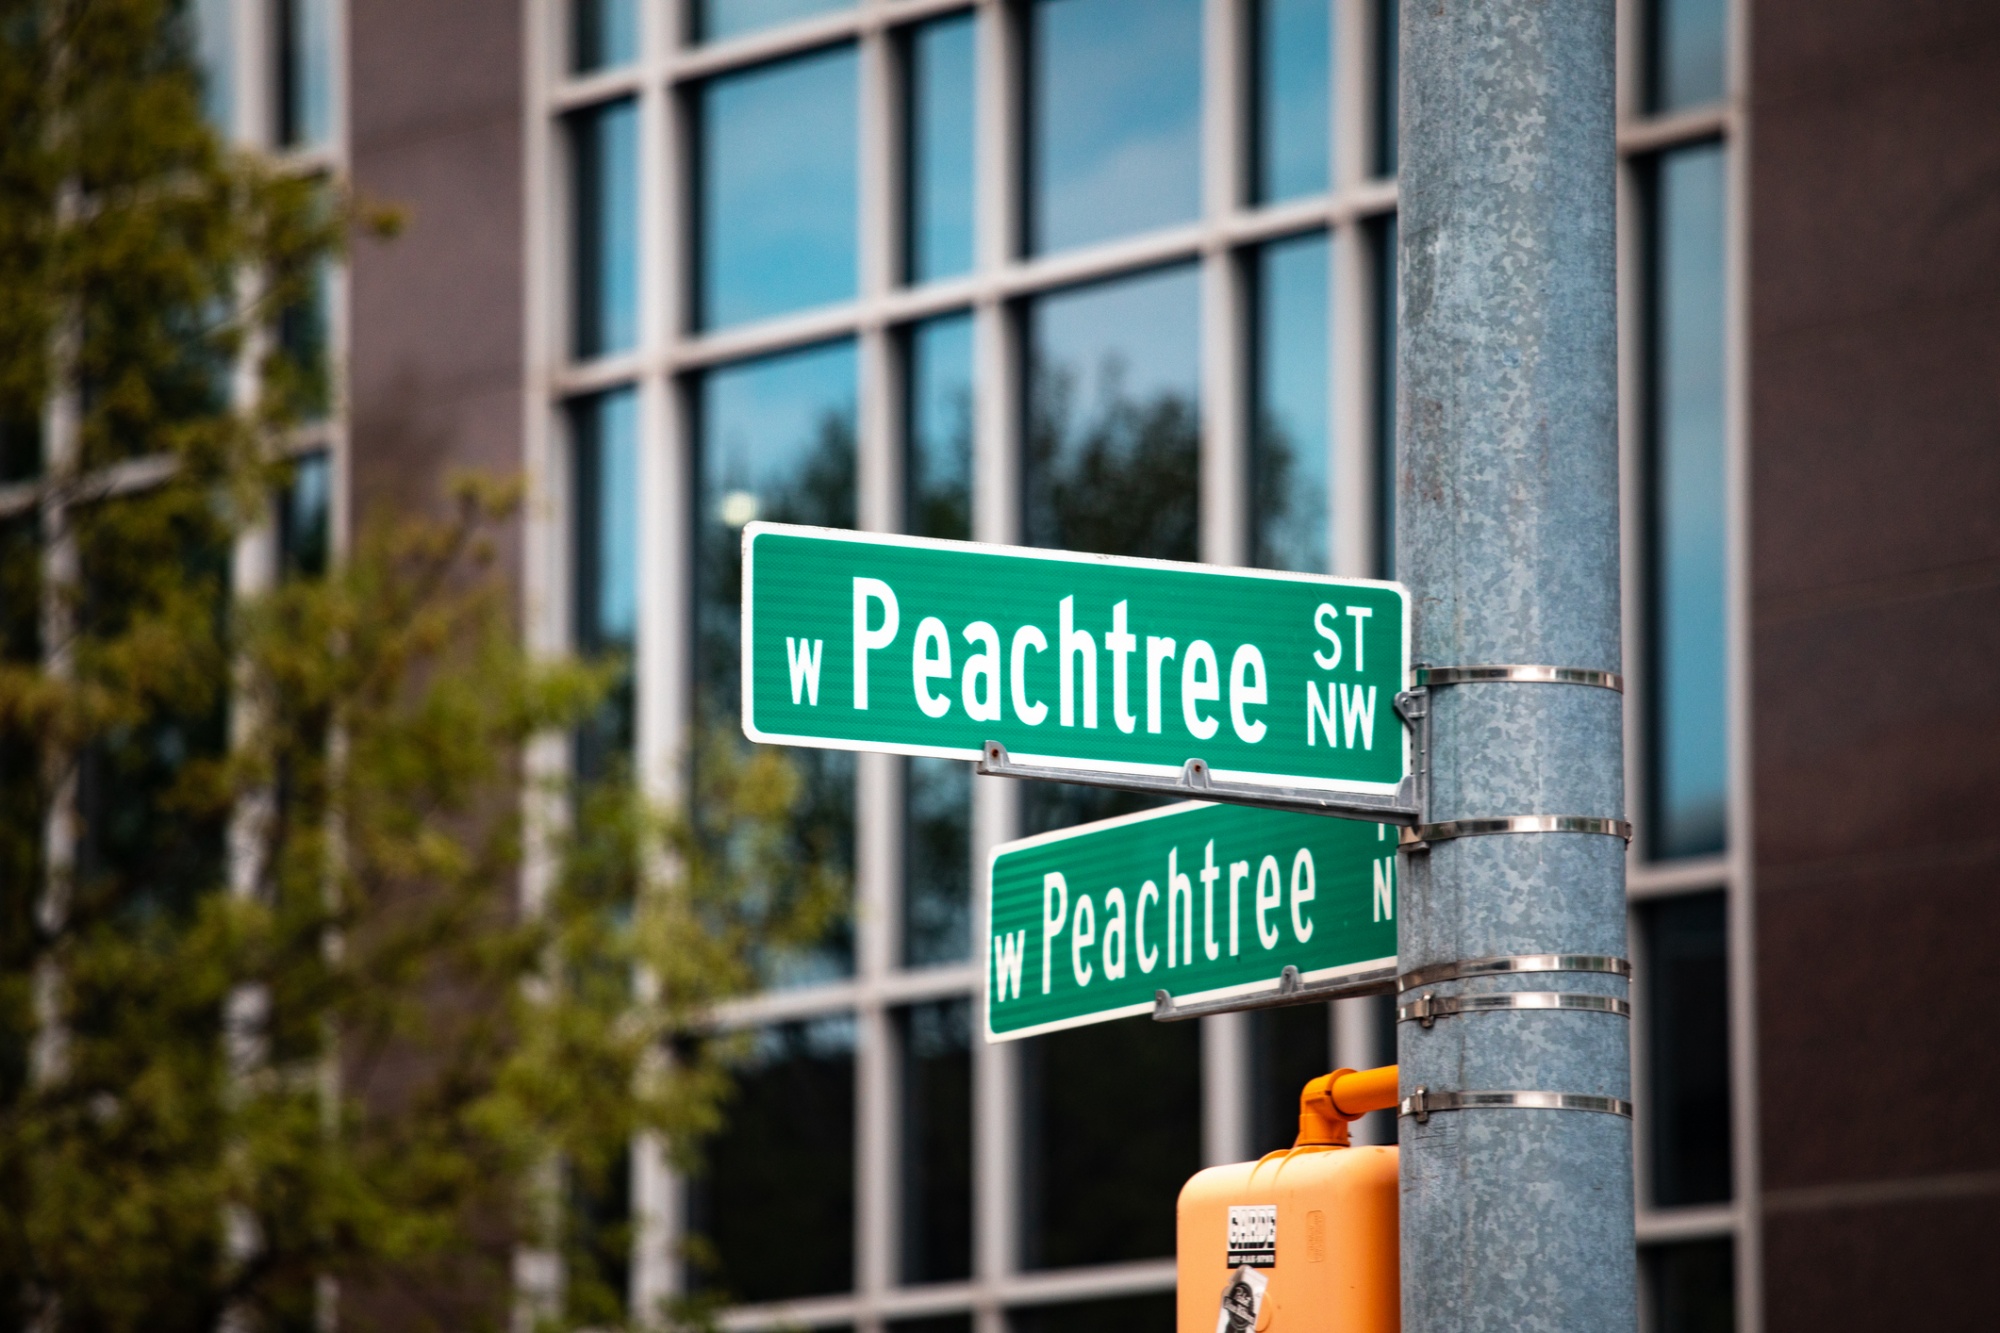 Iconic Peachtree street sign | © Marilyn Nieves / iStock / Getty Images Plus